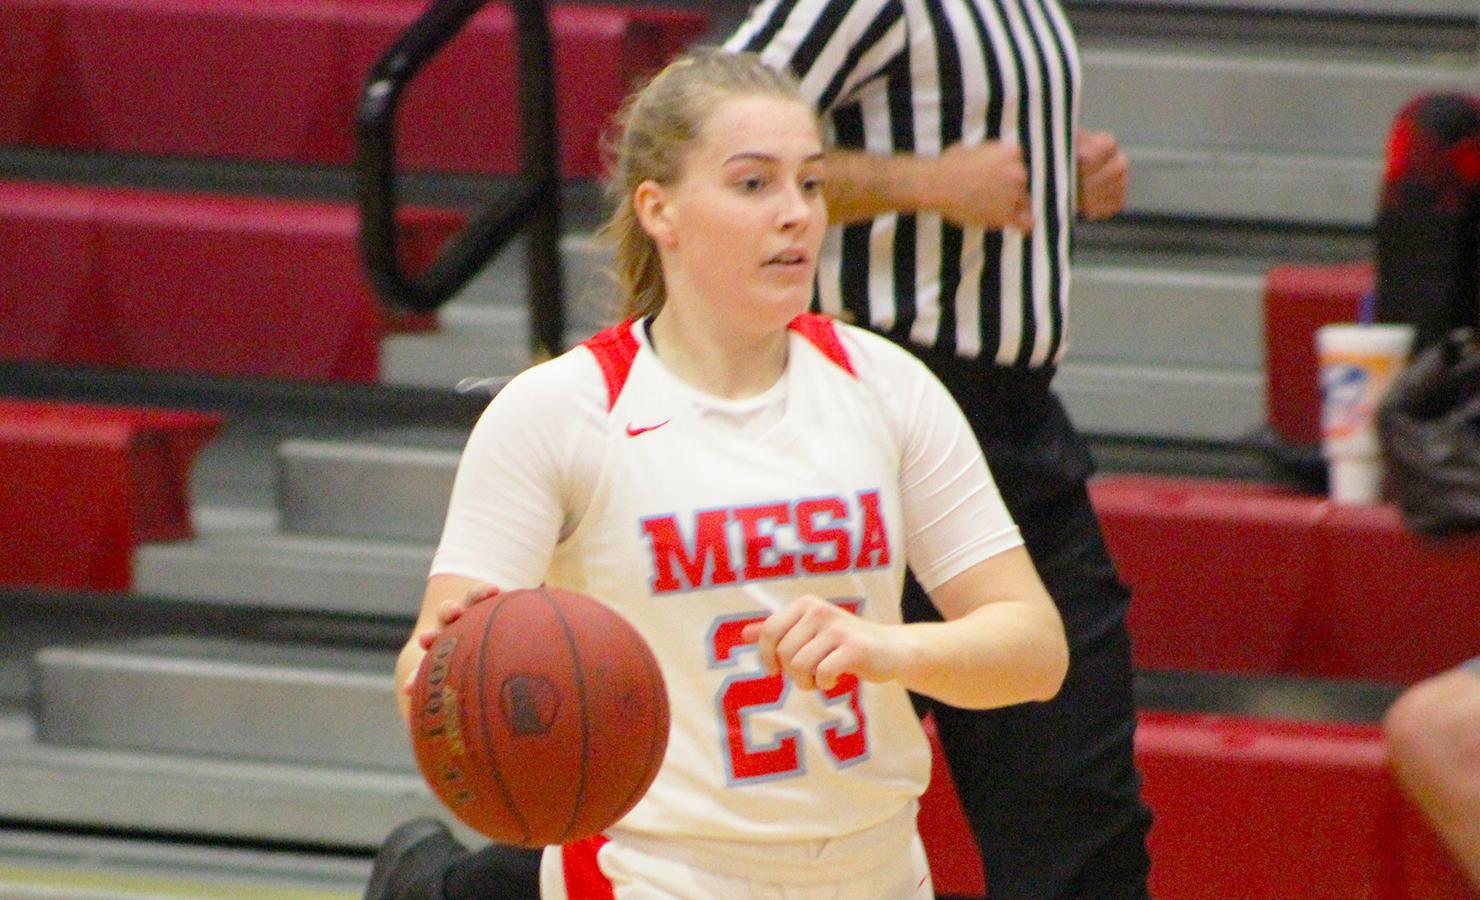 30 Point Win for Mesa Over Bella Vista, 77-47 Final Saturday Afternoon